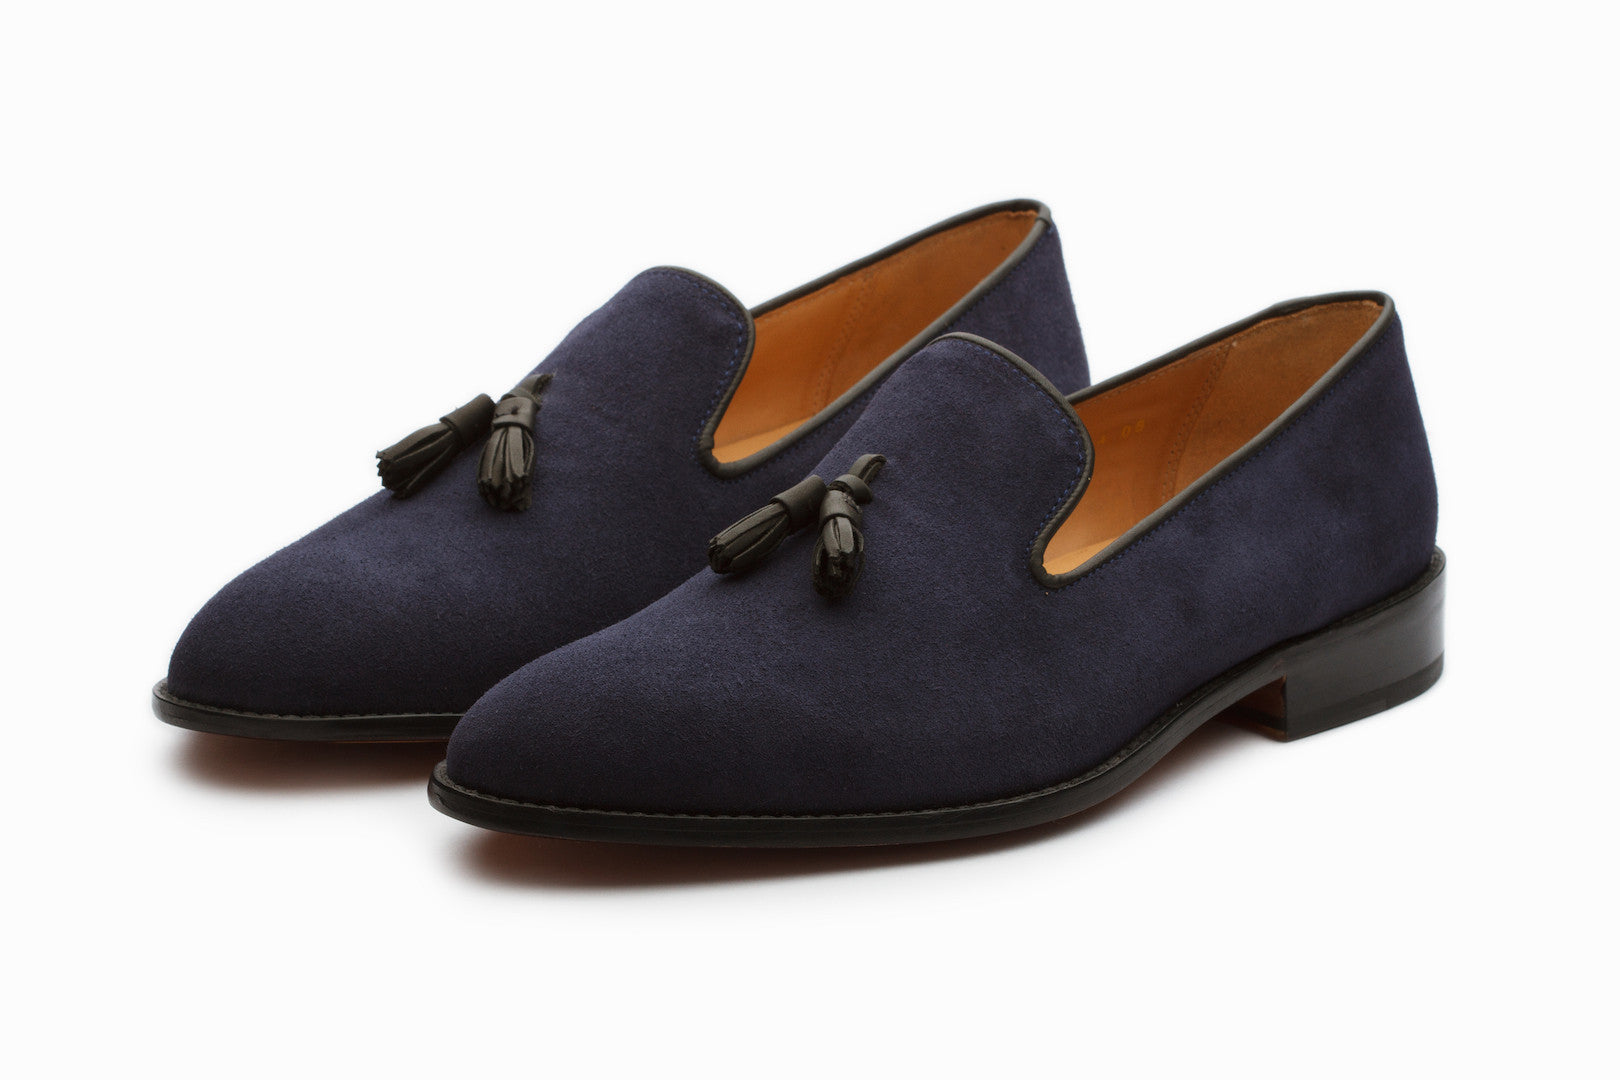 Tassel Loafers - Navy Suede colour shoe 